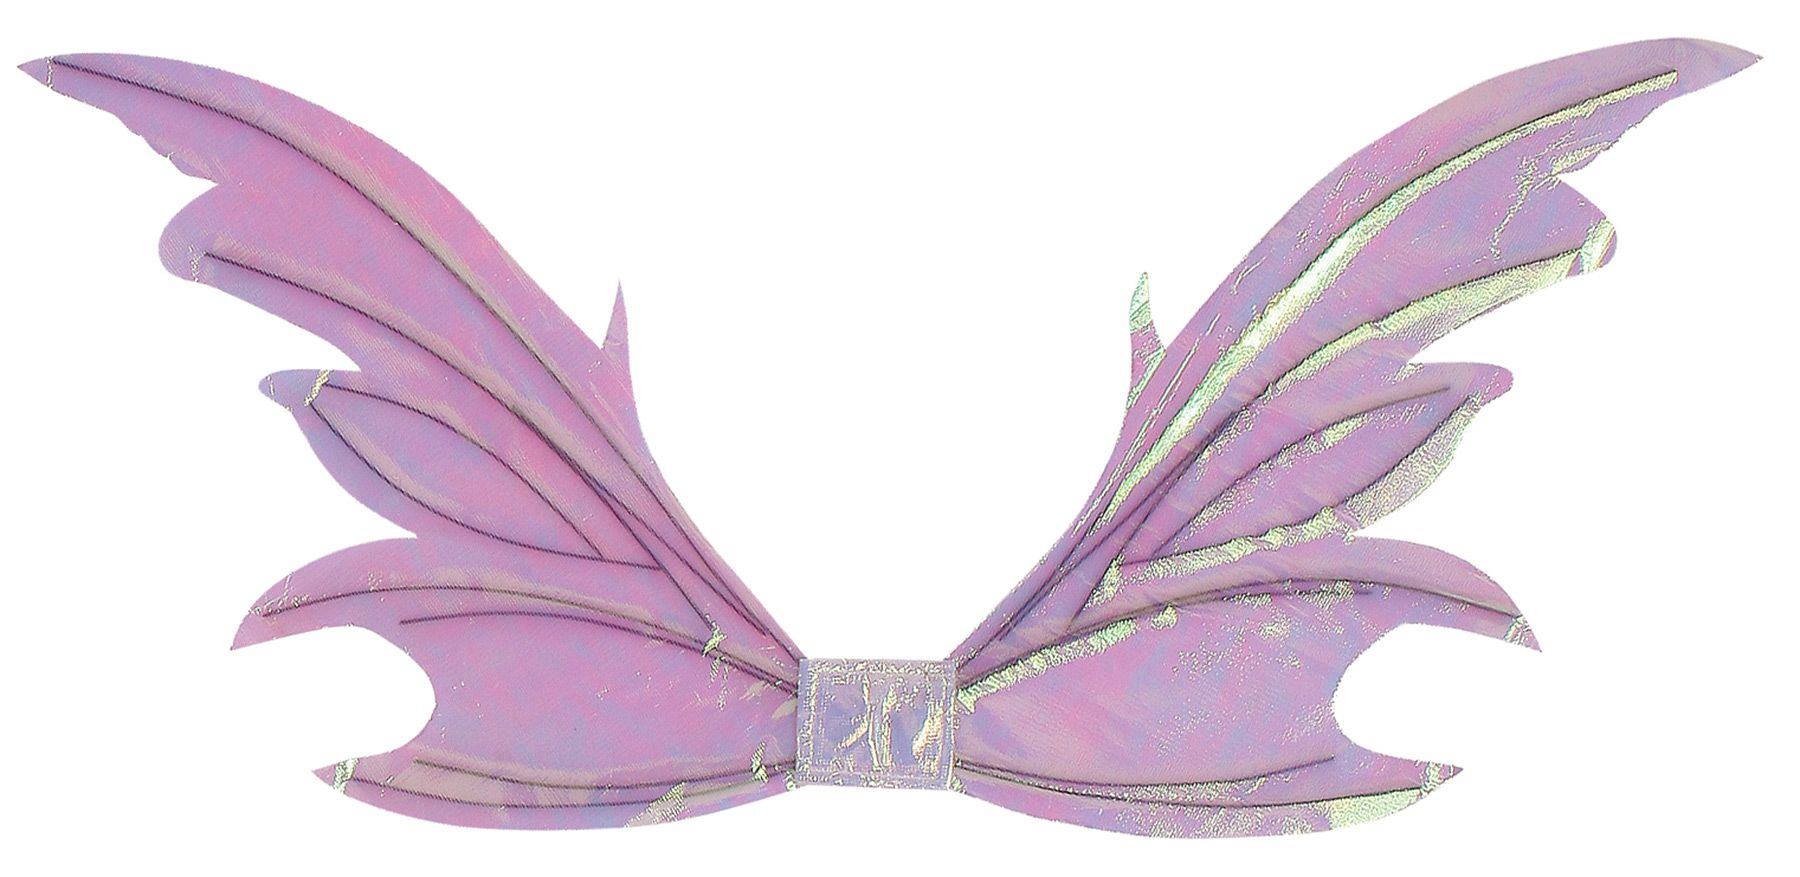 Saint reccomend Fairy wings for adults